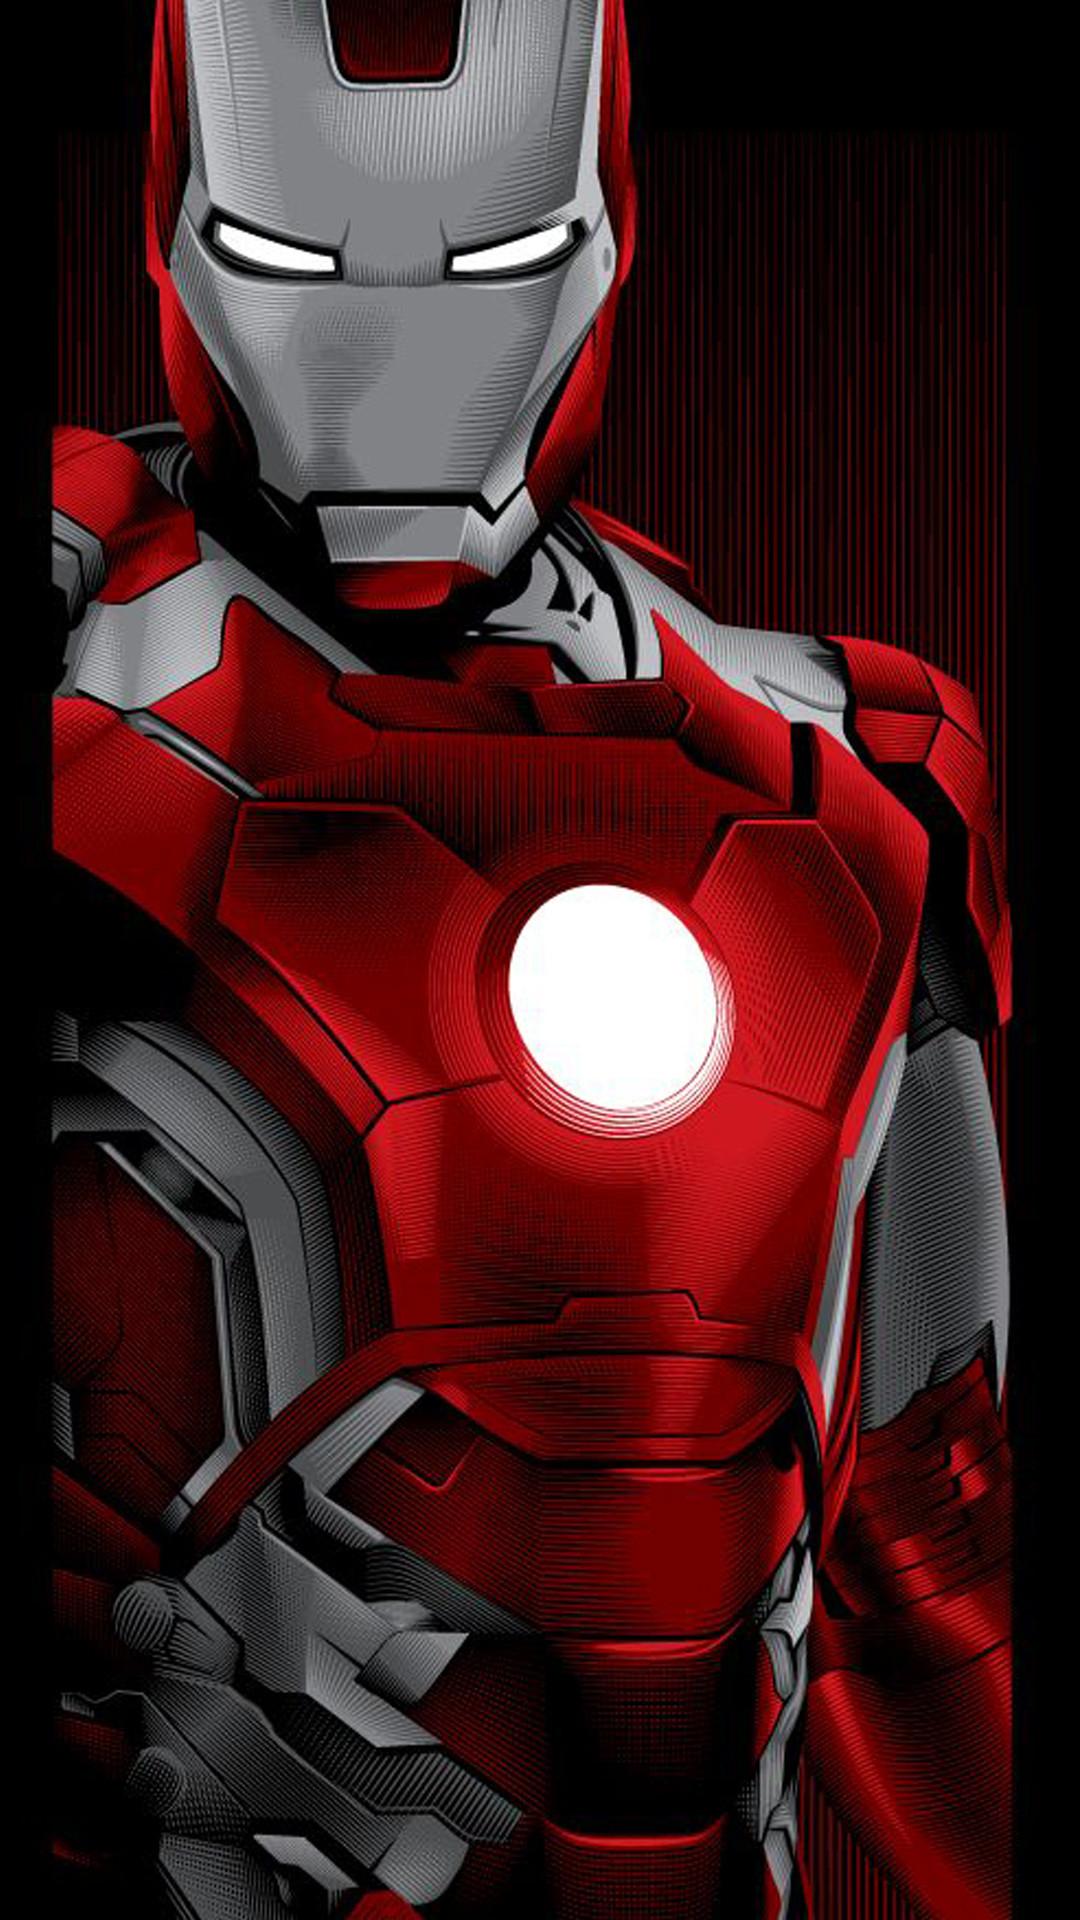 Iron Man Wallpaper iPhone , Find HD Wallpaper For Free